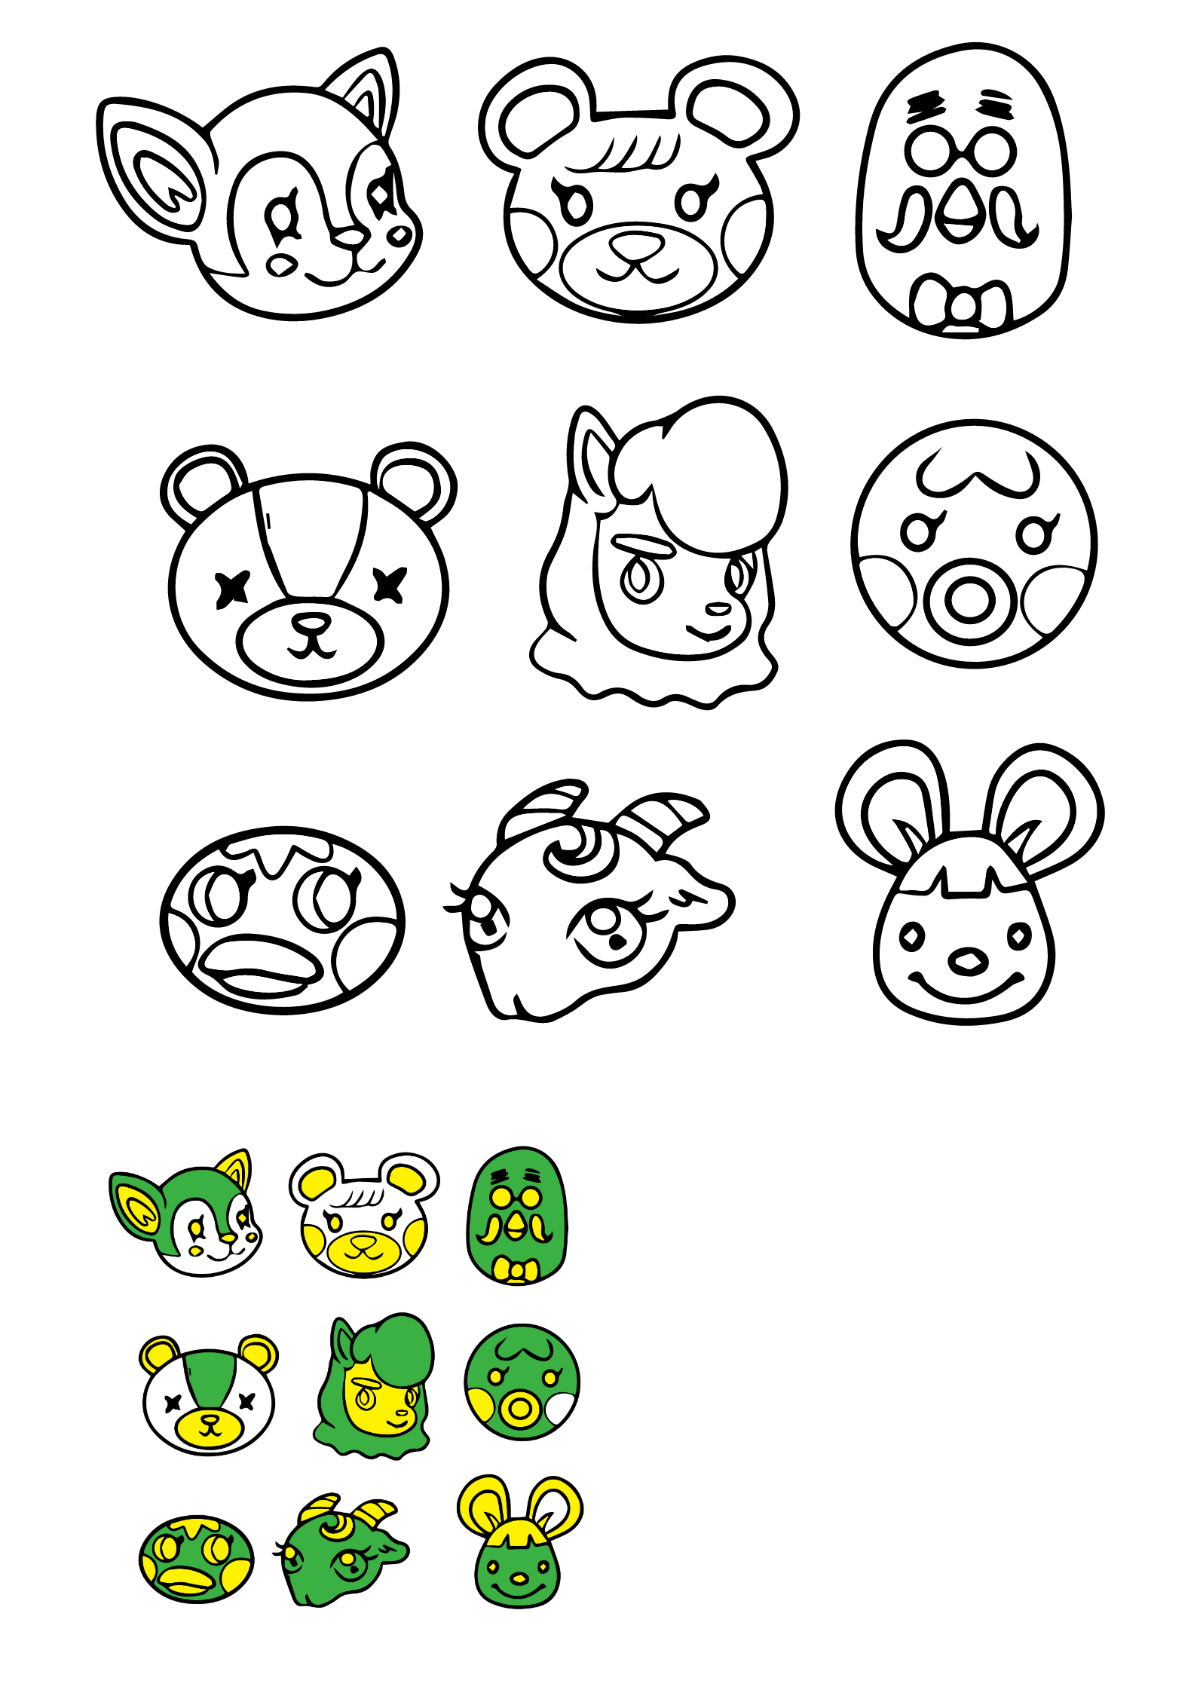 Animal Crossing Coloring Page Template